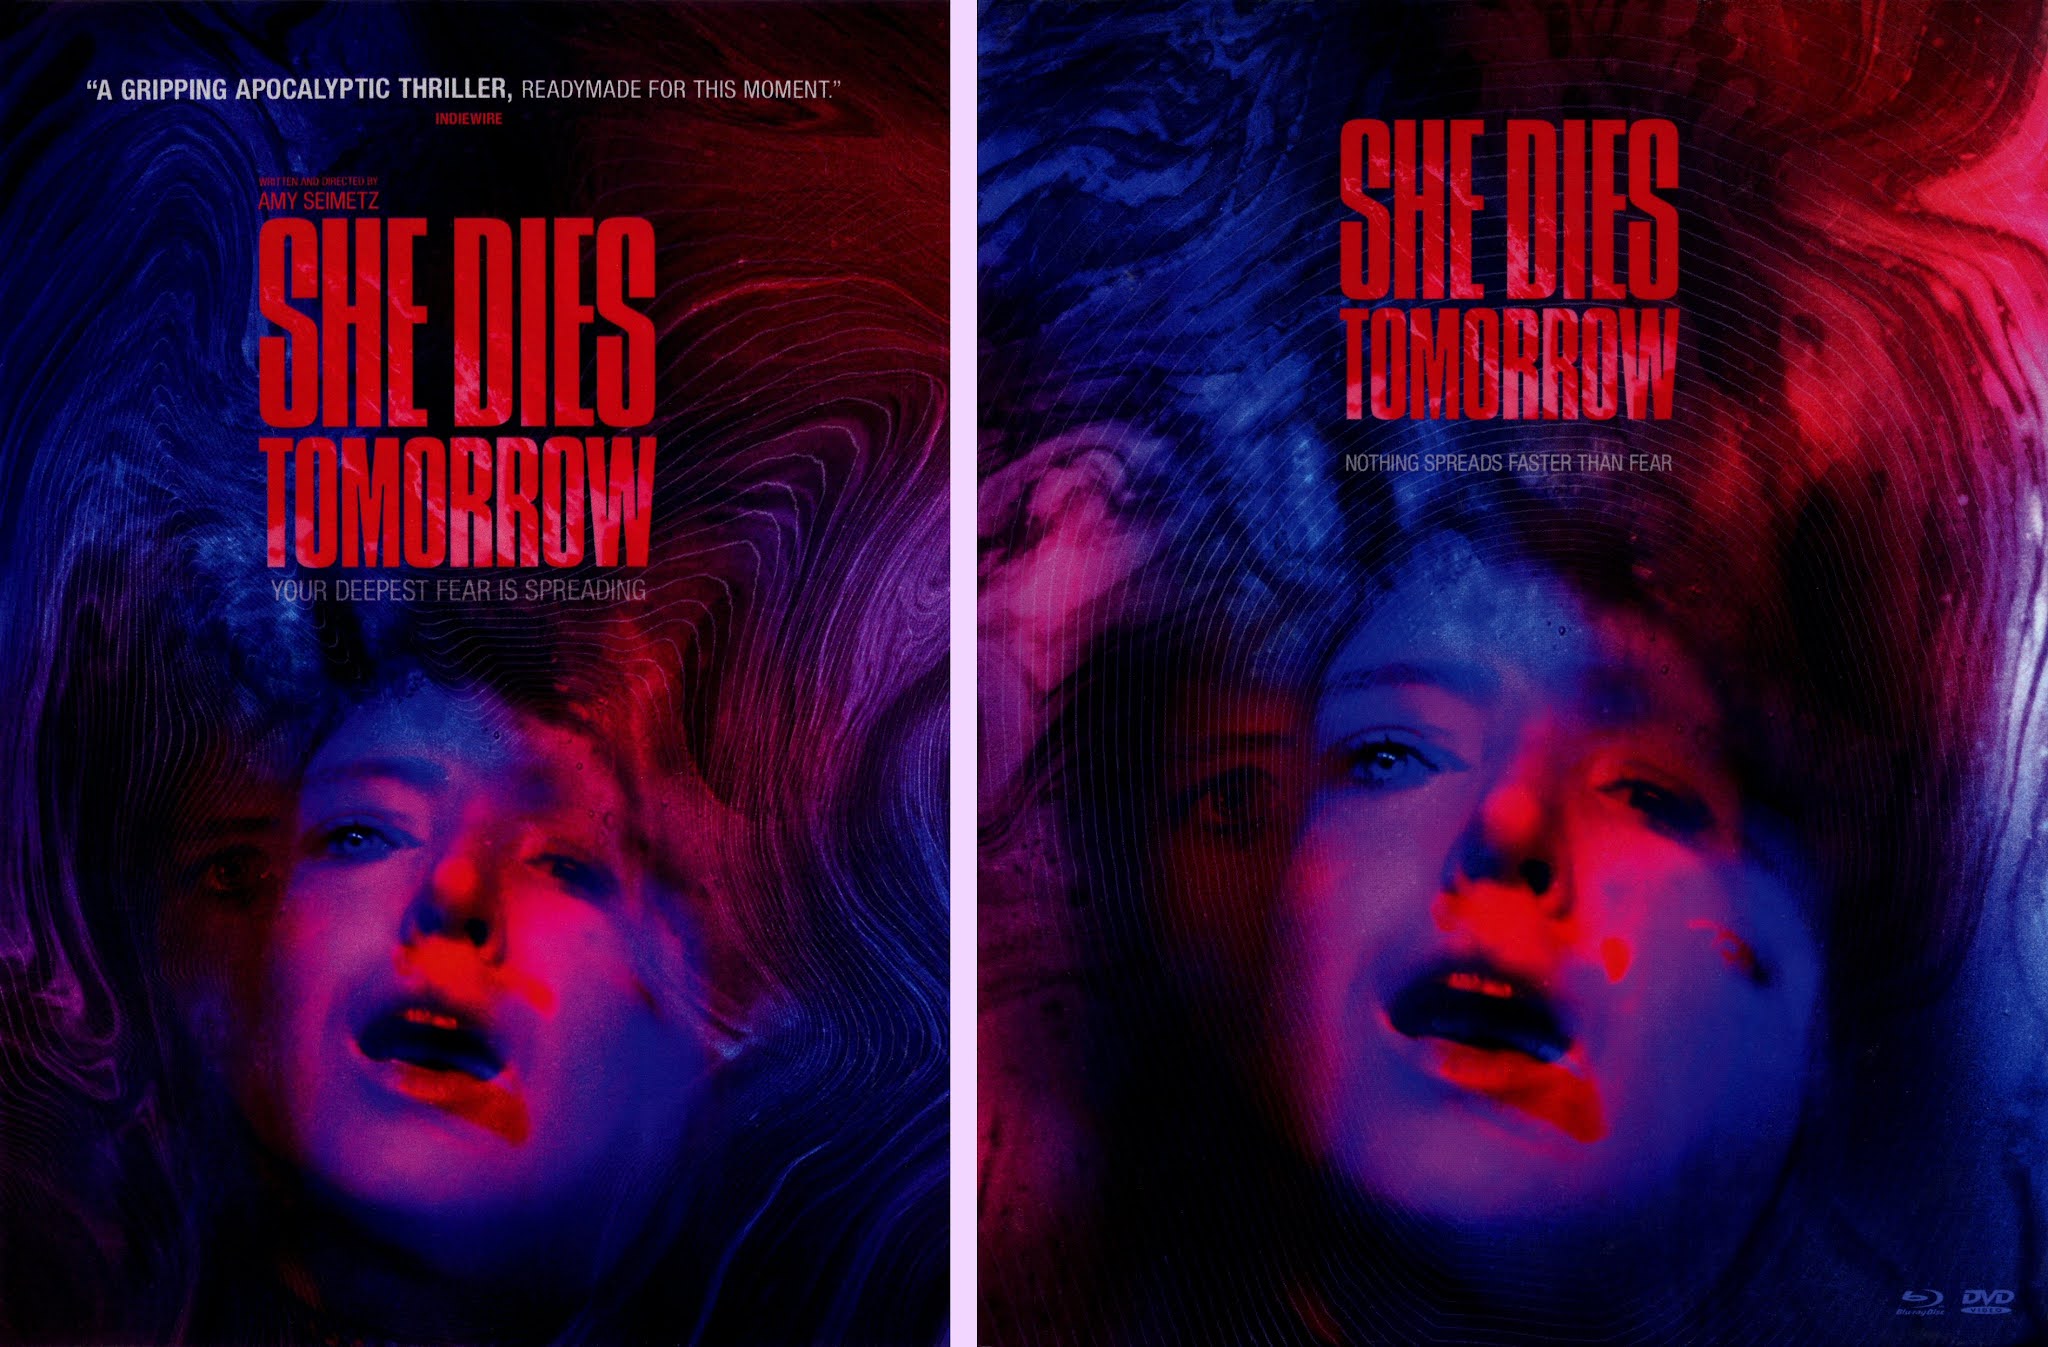 DVD Exotica: Yes, She Dies Tomorrow Is On Blu Now!